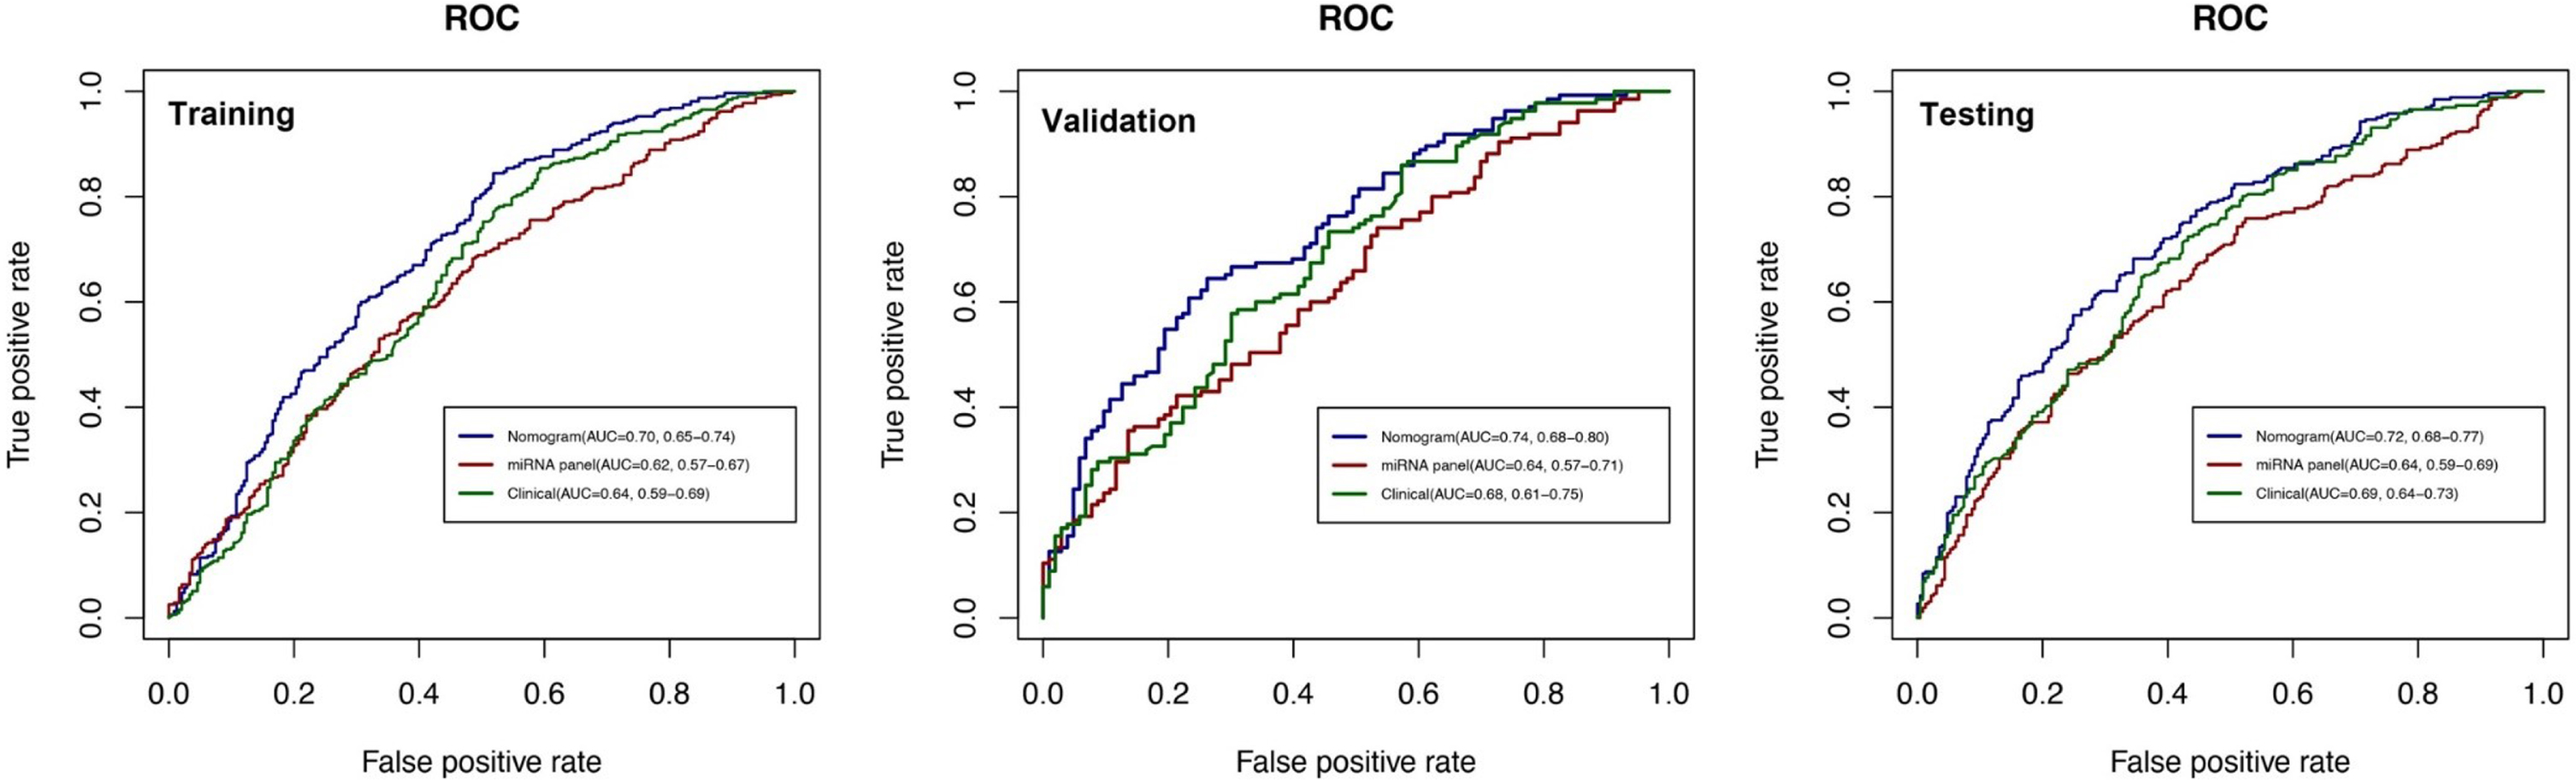 ROC curves for comparisons of the nomogram, clinical, and miRNA panel in the training, validation, and testing datasets. The labels show the AUC and its 95% confidence interval in the nomogram (blue line), miRNA panel (red line), and clinical model (green line). The clinical model consists of age, gender, and education level, while the miRNA panel includes 10 miRNAs.